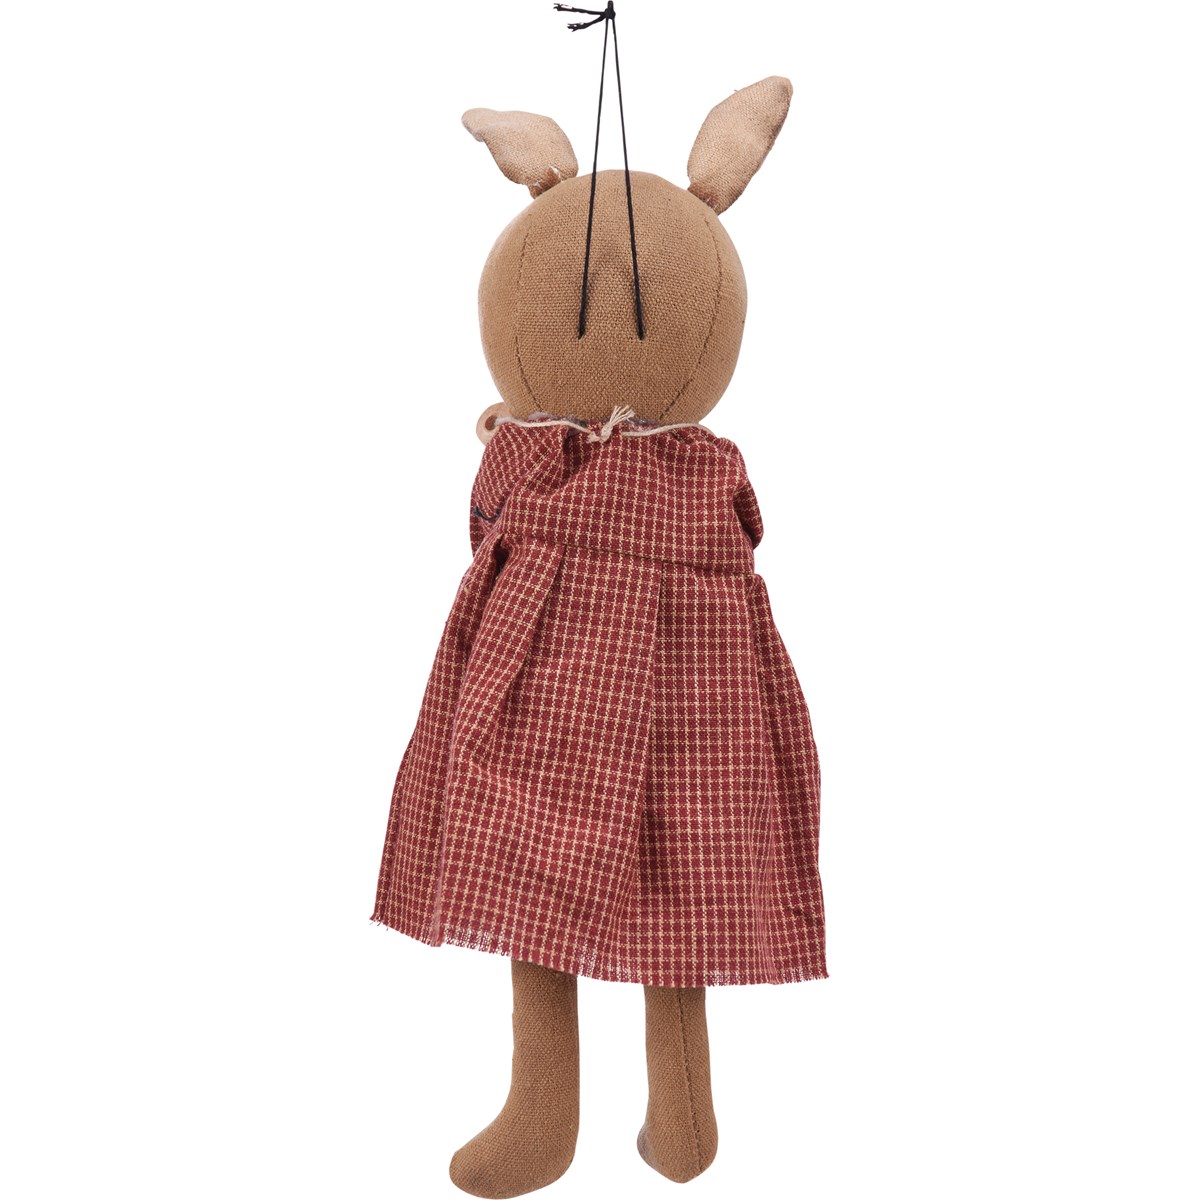 Bloom Bunny Doll - Cotton, Wood, Wire, Plastic